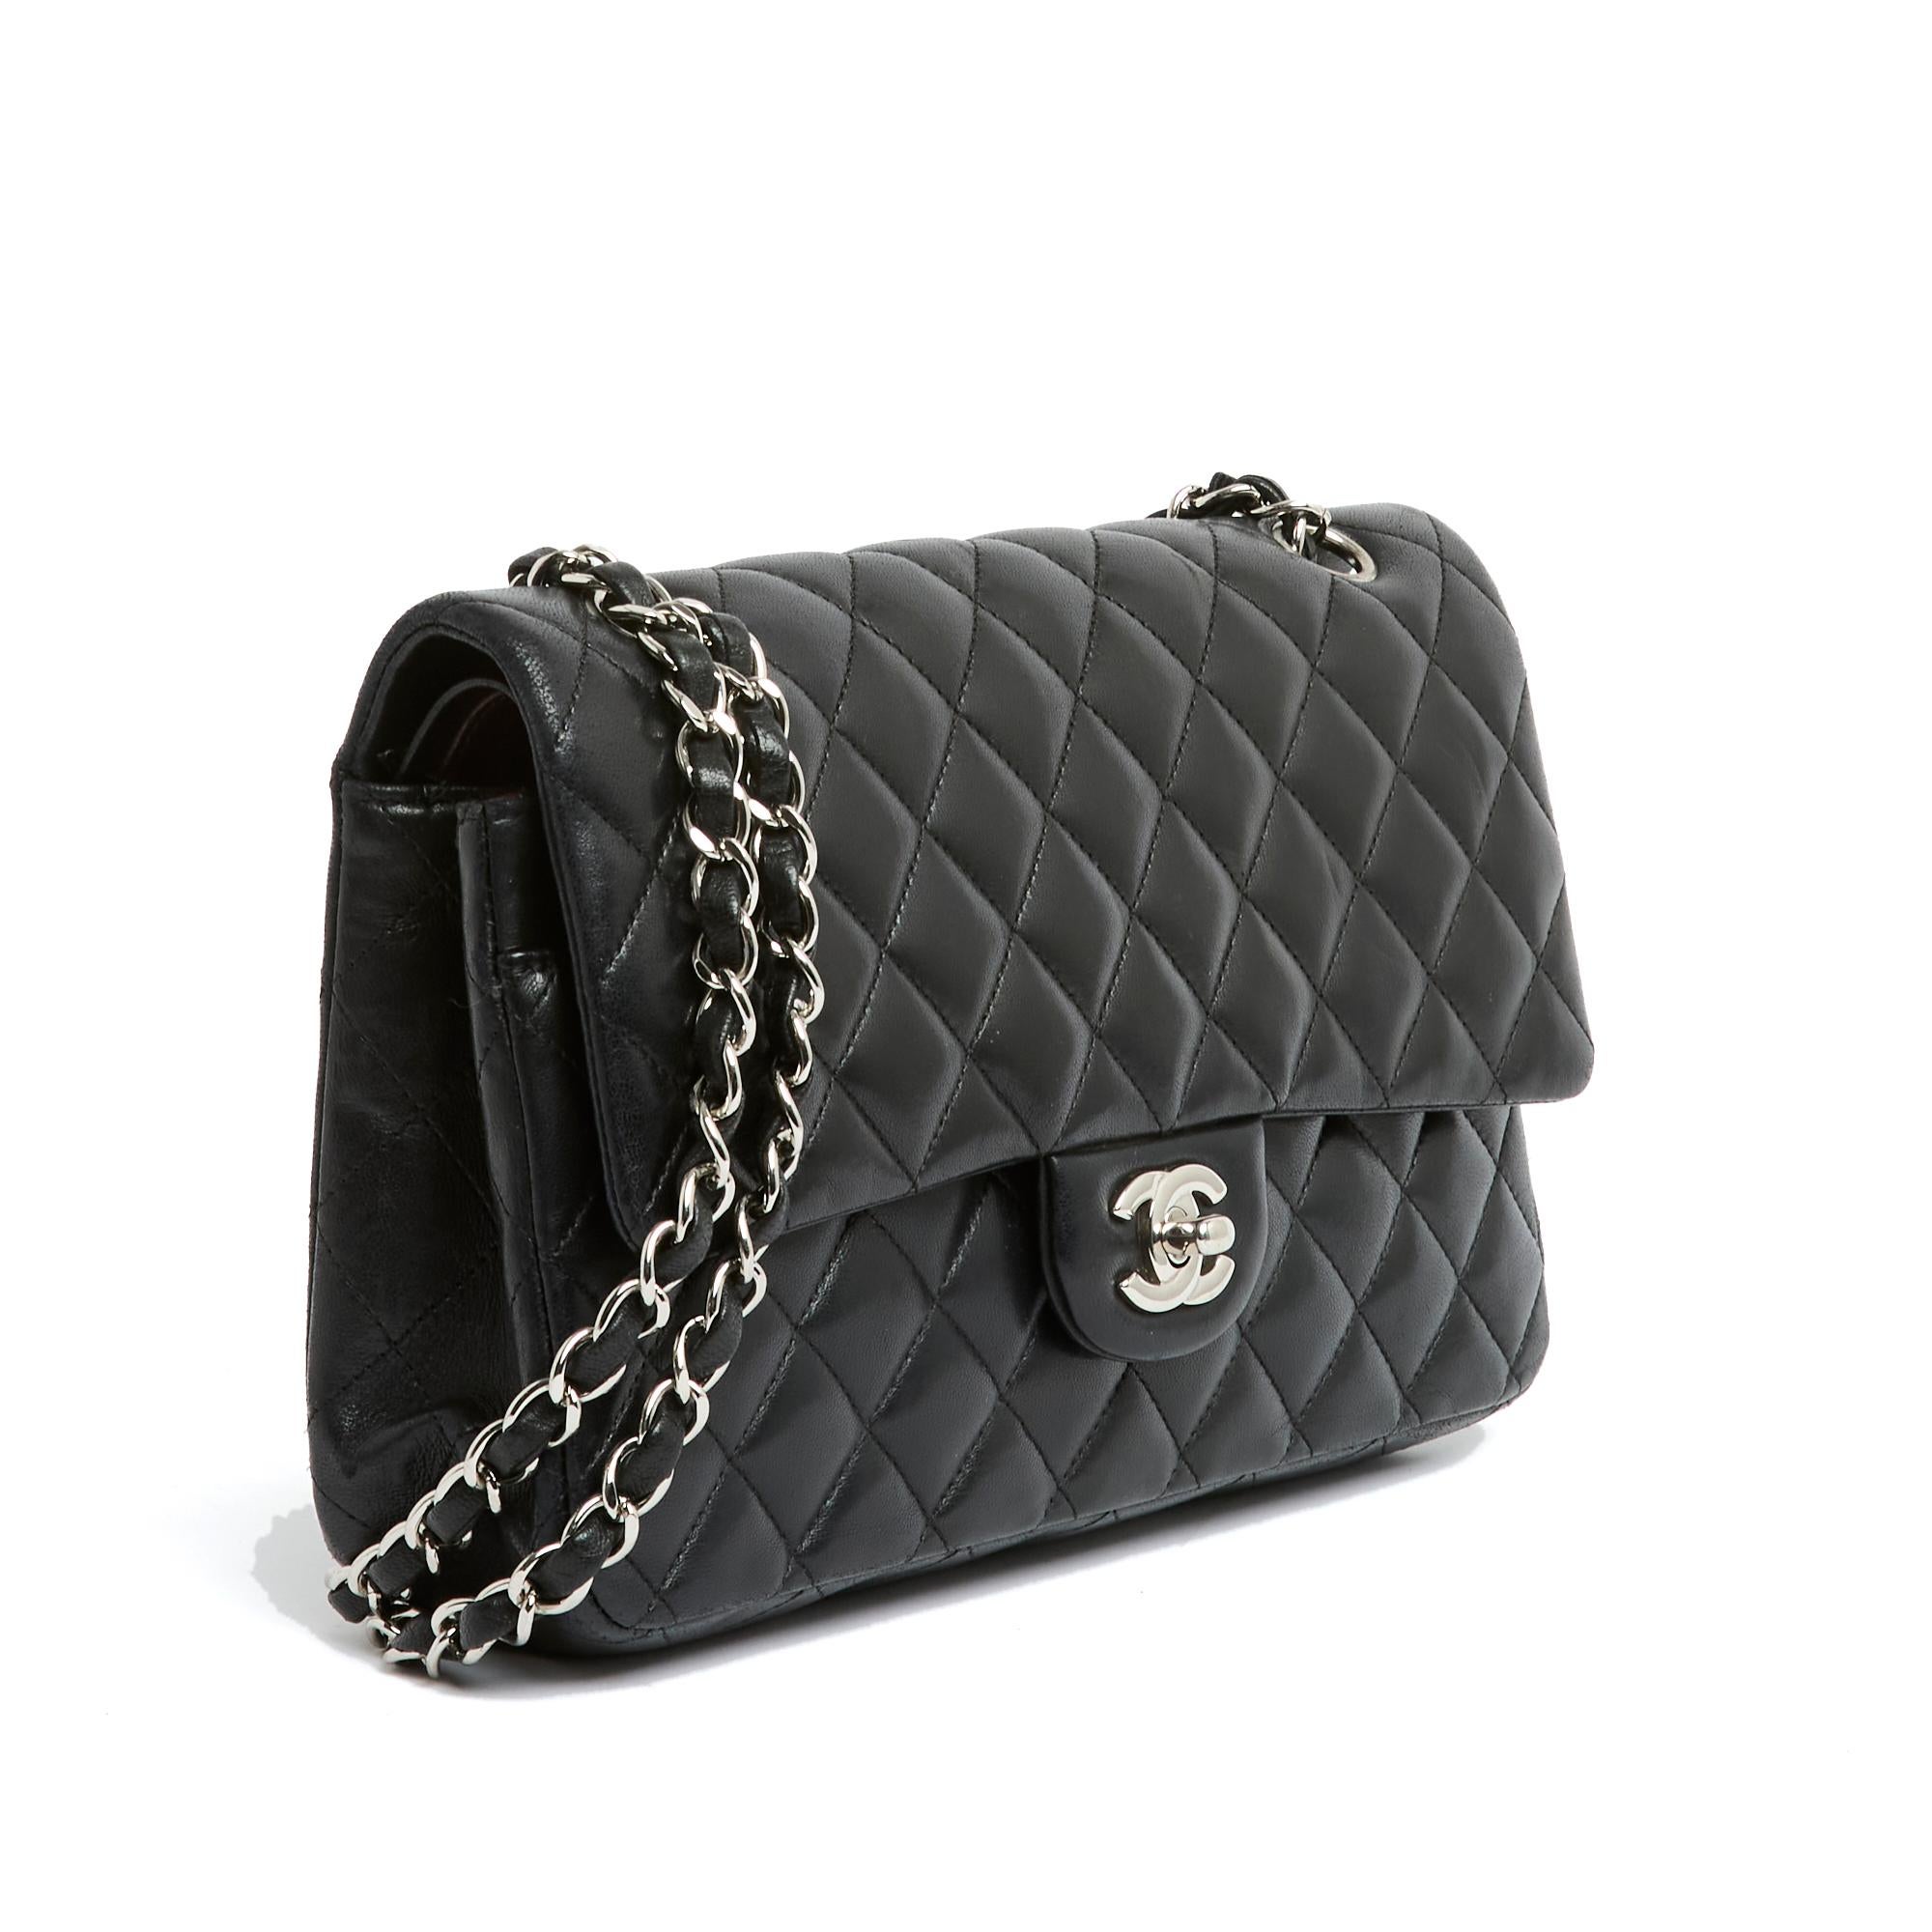 Chanel bag, Classic line, Double Flap model, 26 cm format, in quilted black leather, silver metal CC clasp, silver metal chain strap for shoulder or cross body wear, burgundy leather interior with a double patch pocket, large patch pocket on the